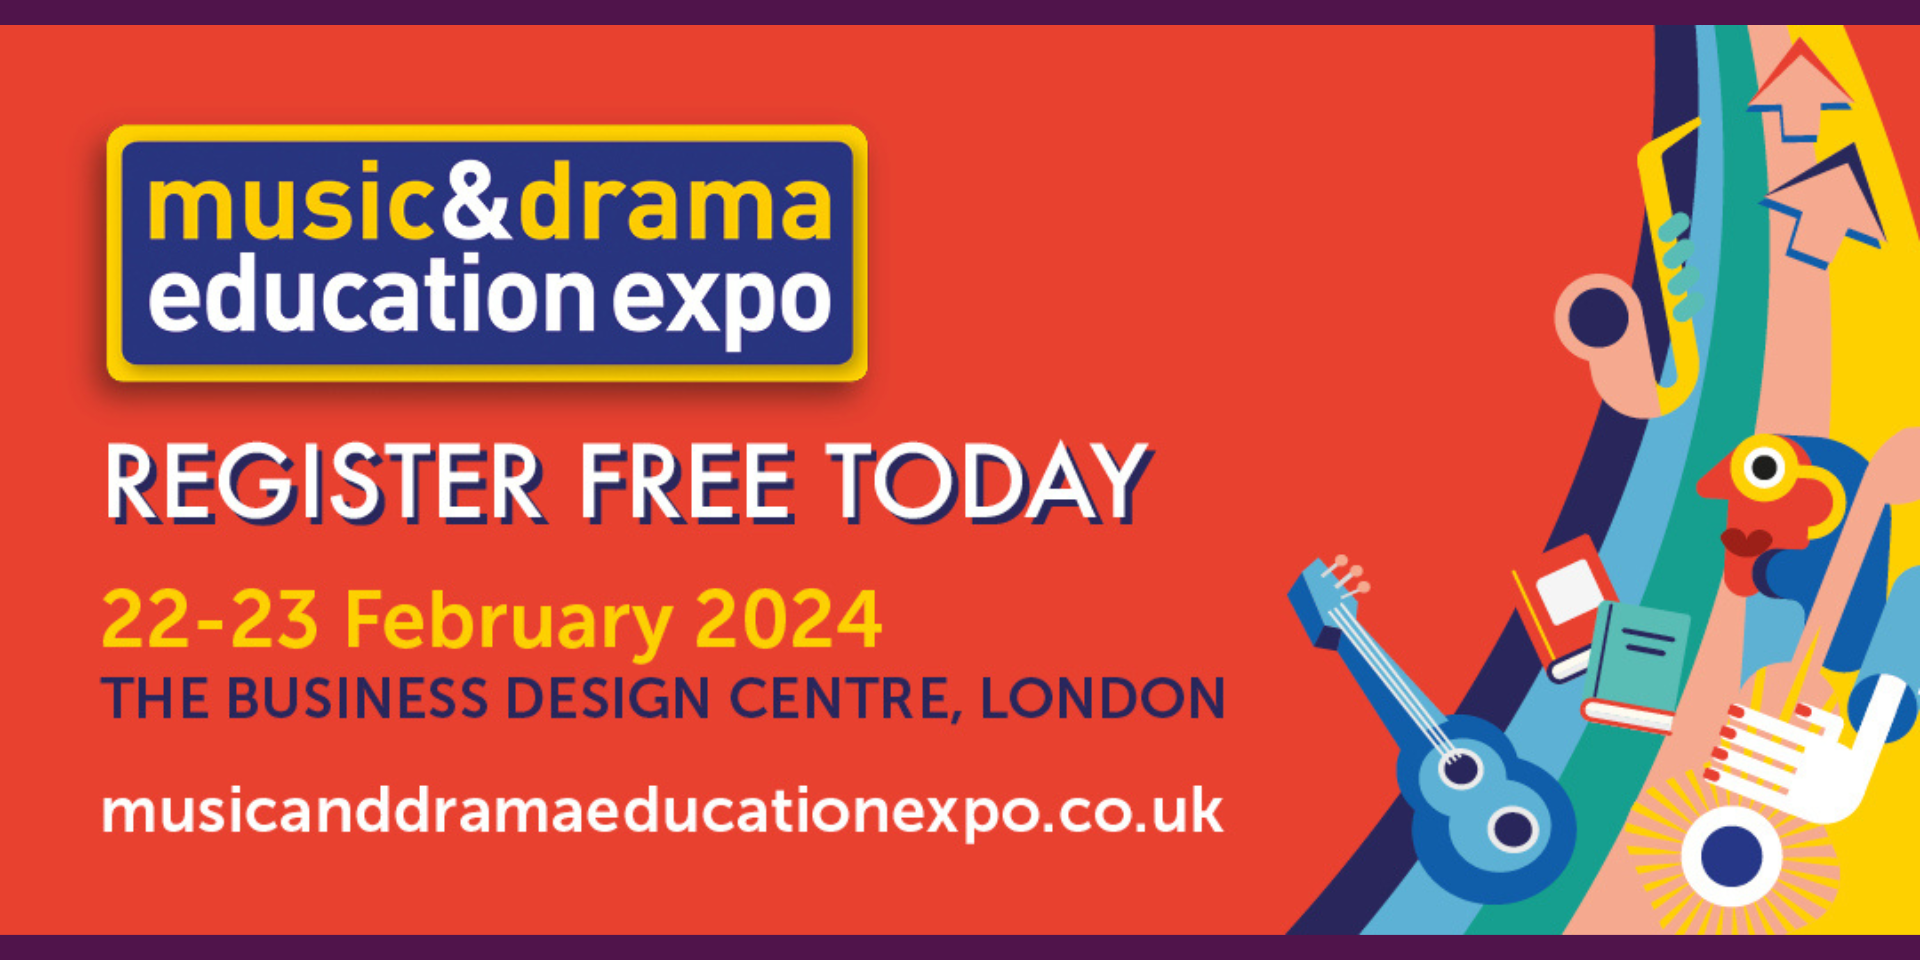 Trinity College London Takes Centre Stage at the Music & Drama Education Expo 2024